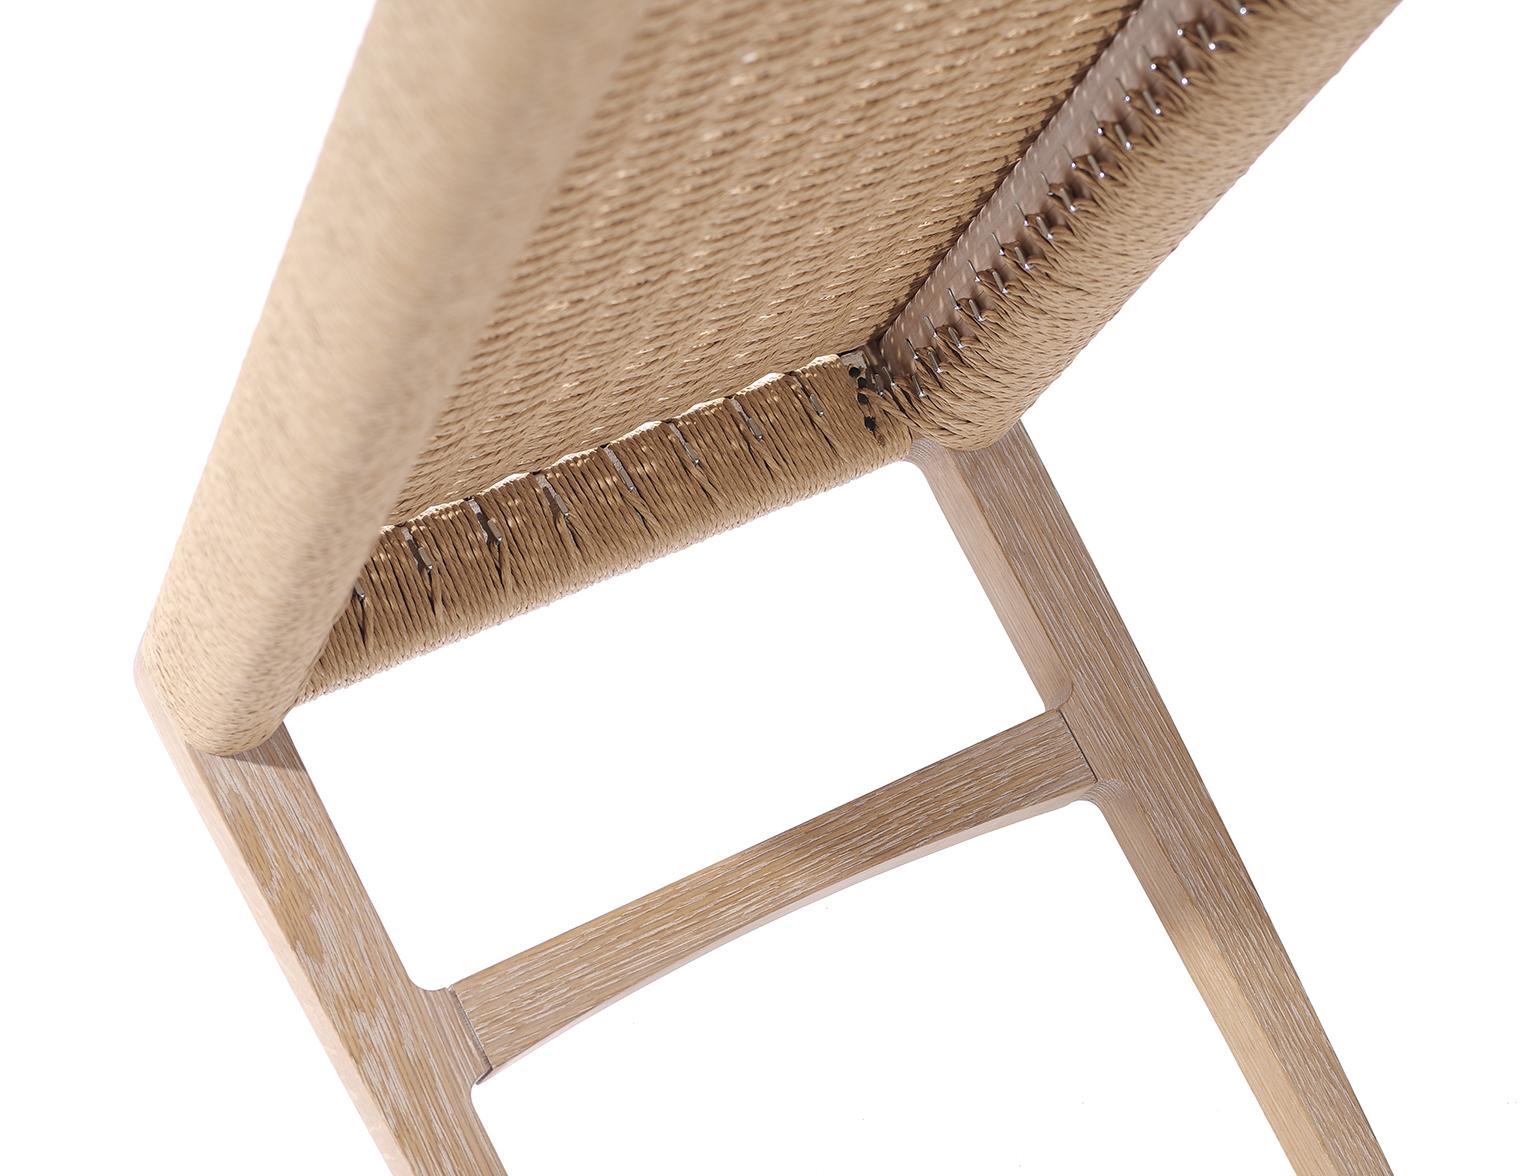 Woven Giacomo Bench, Cerused Oak with Handwoven Danish Cord For Sale